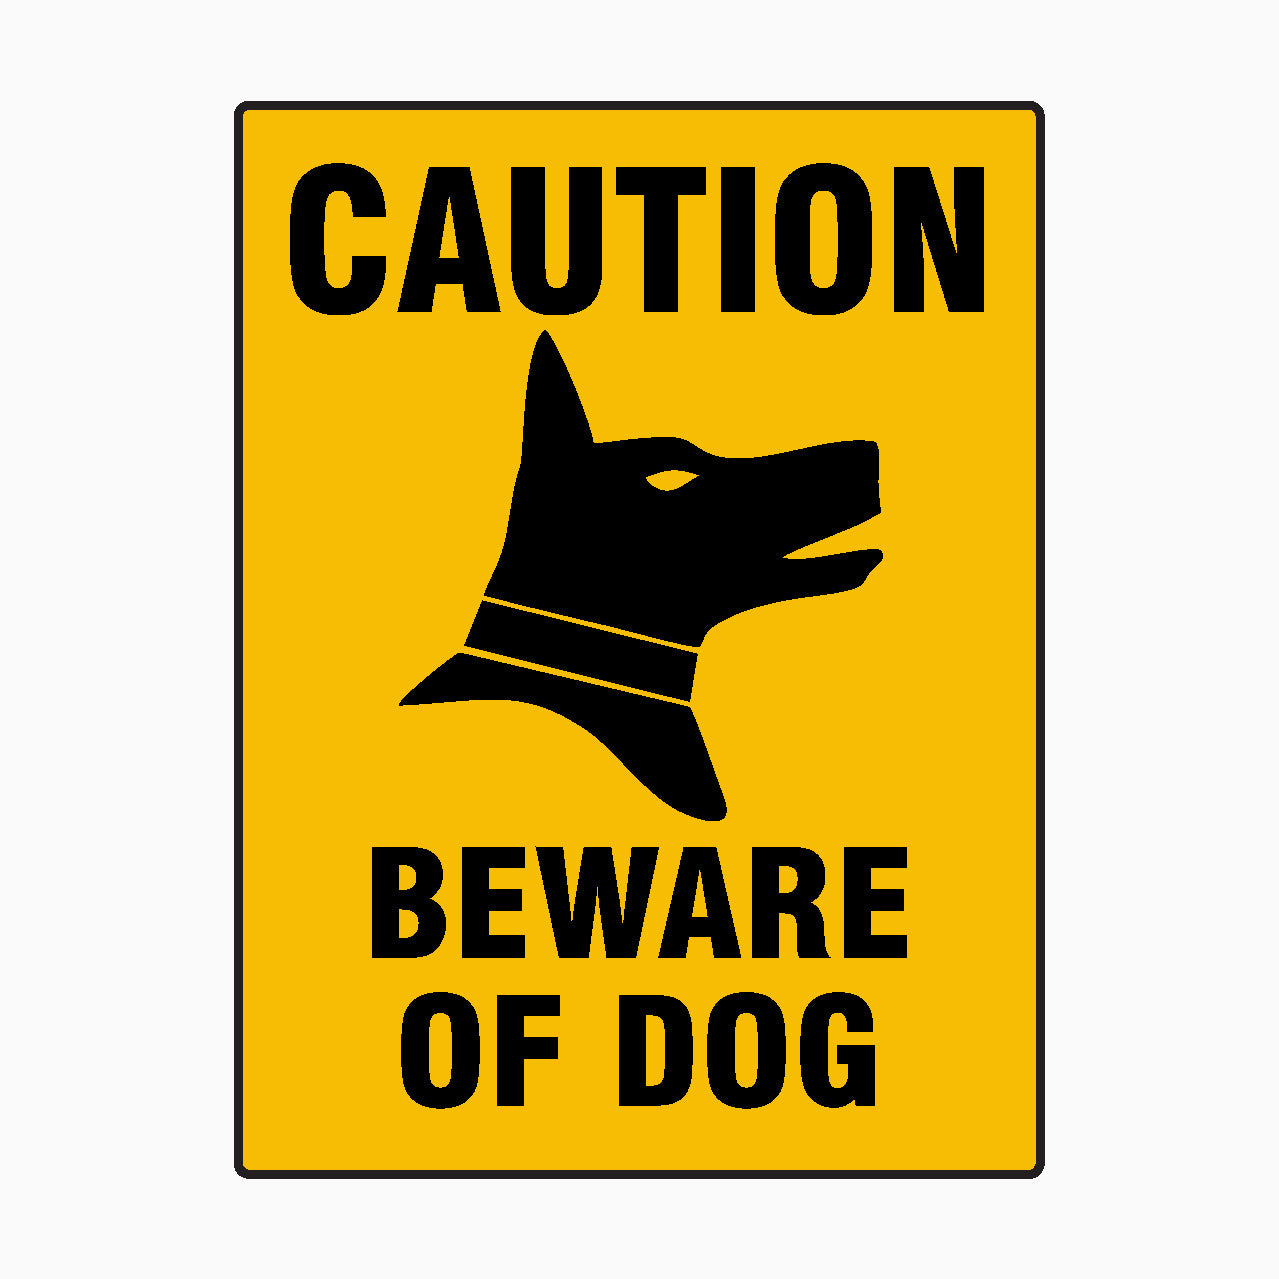 BEWARE OF DOG SIGN - caution sign